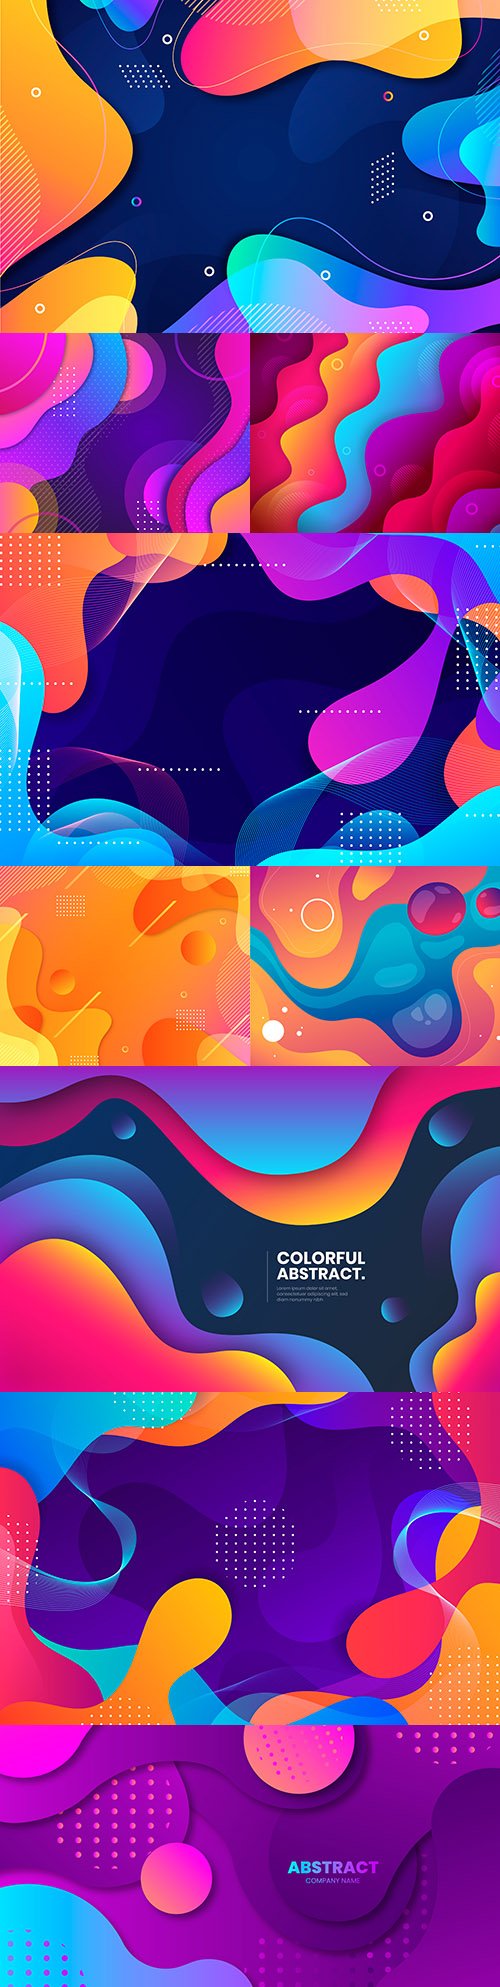 Colorful wavy background gradient abstract design